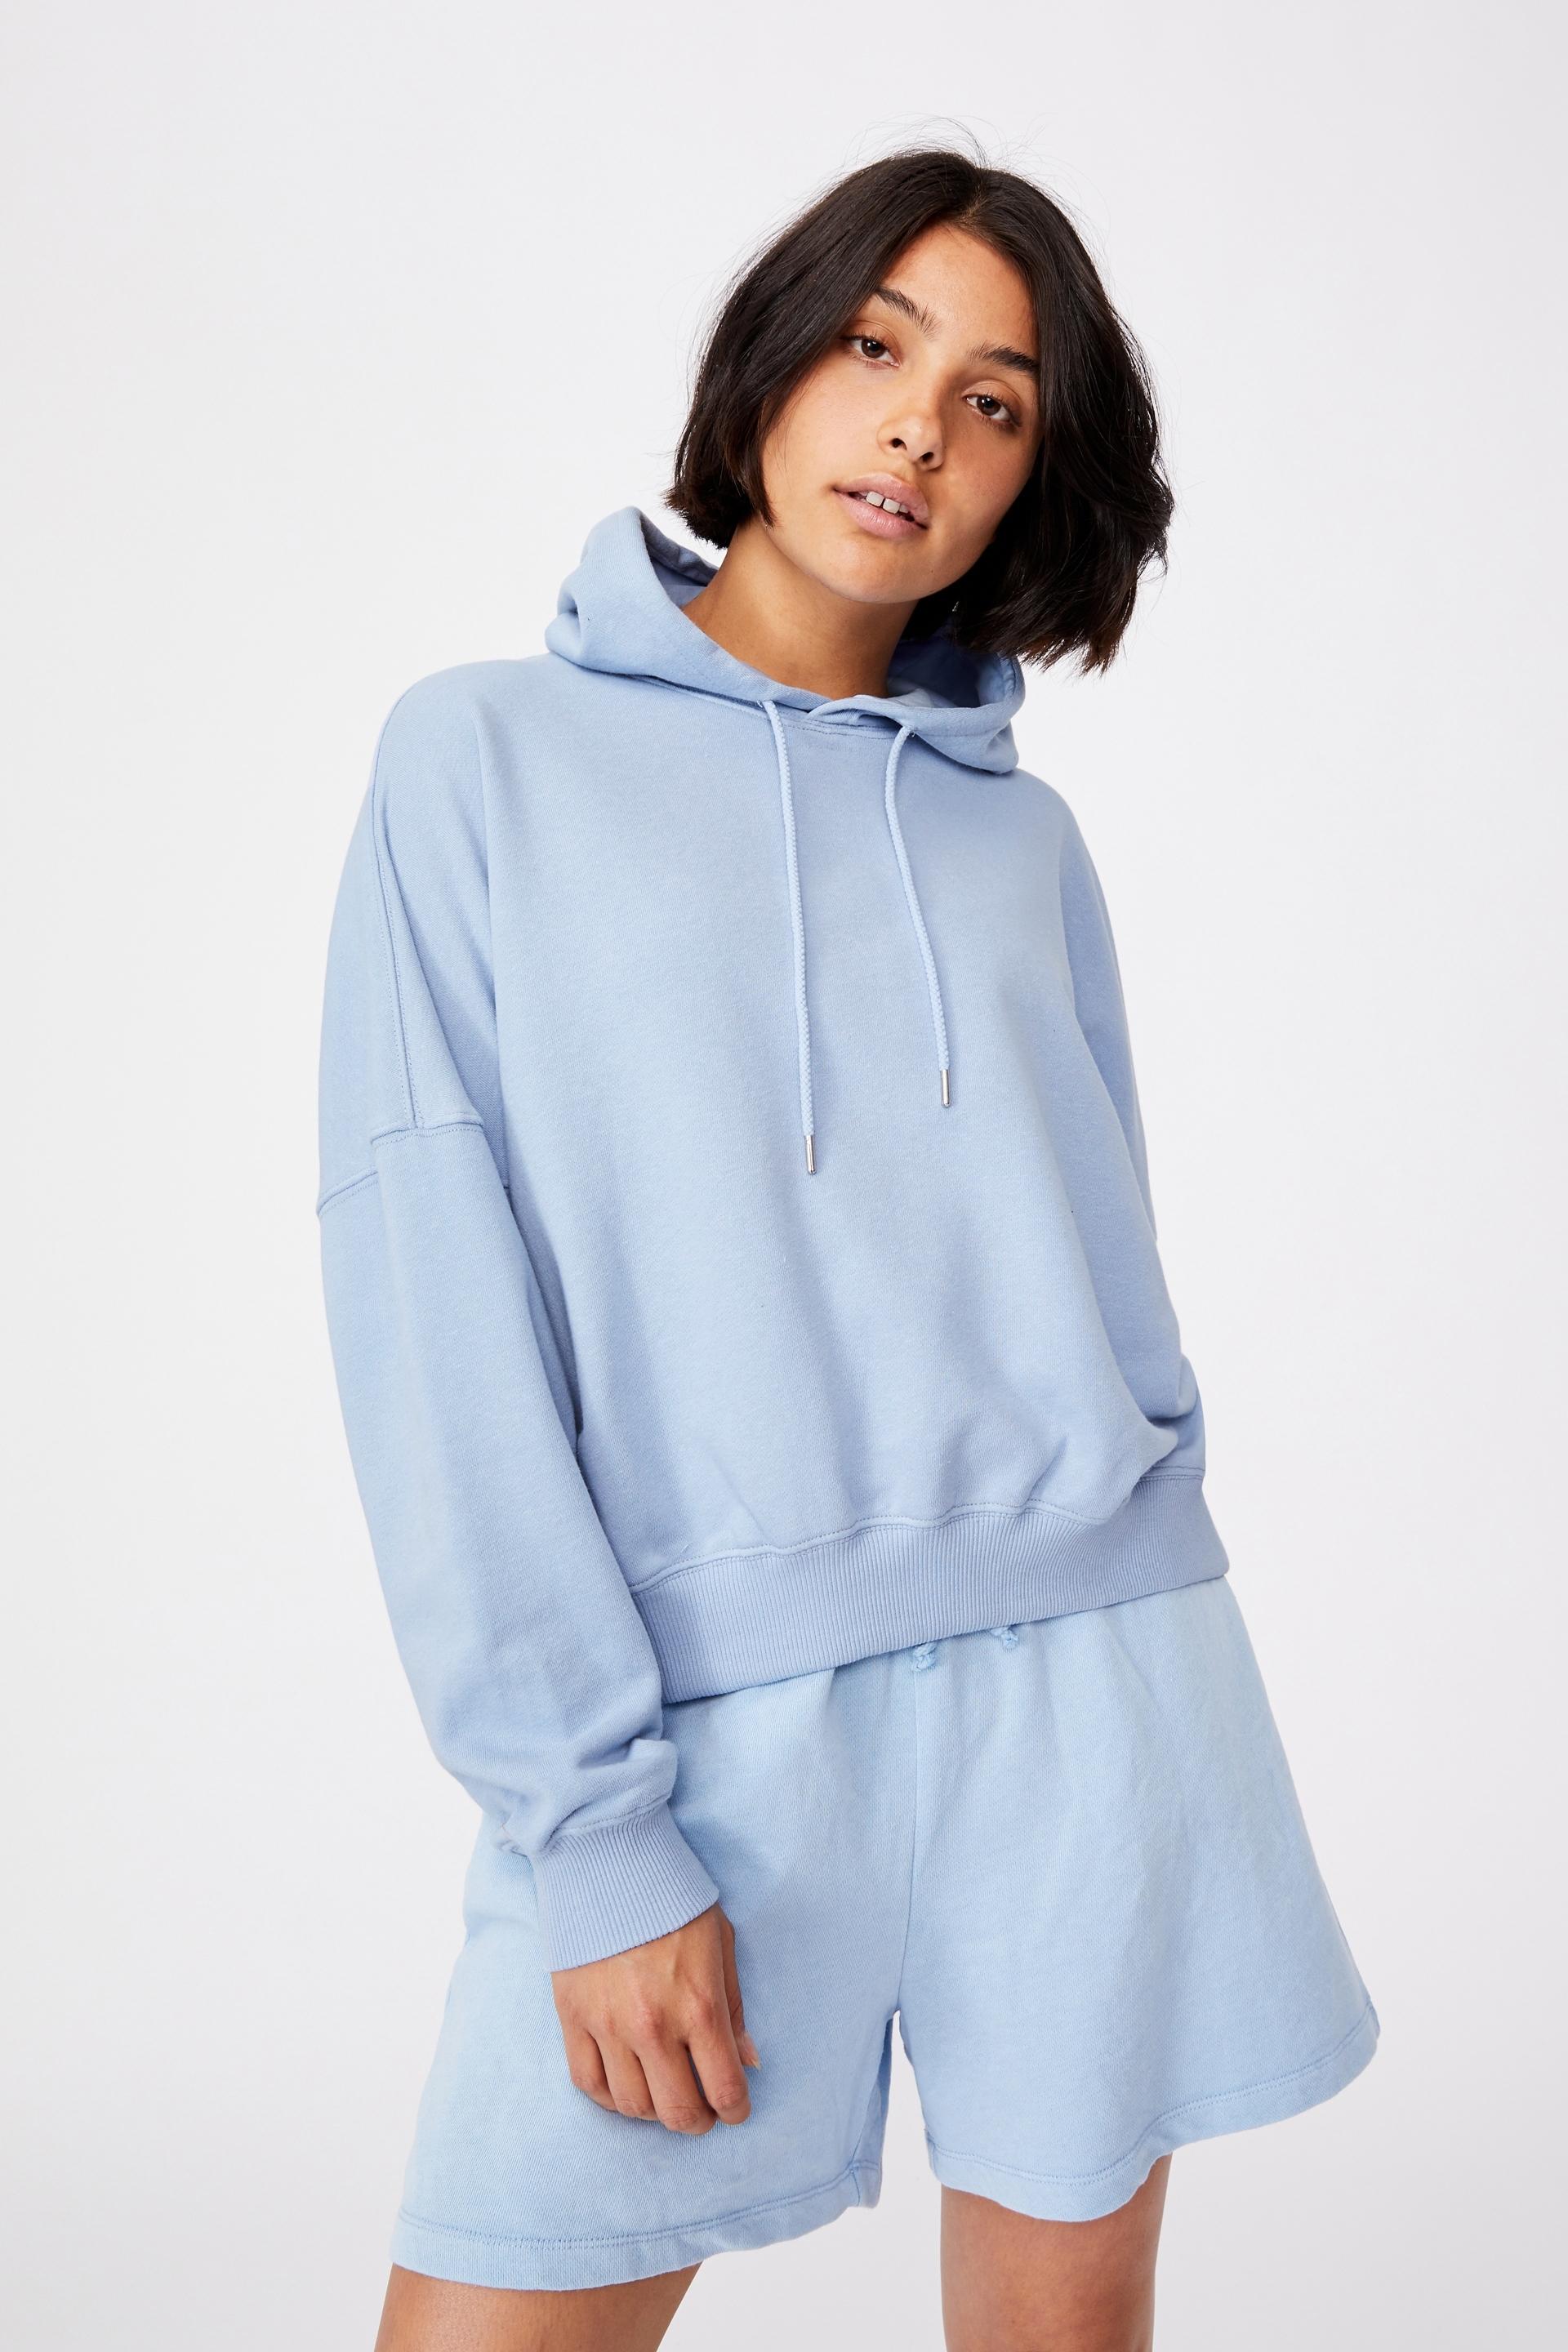 Your favourite hoodie - dusk blue Cotton On Hoodies & Sweats ...